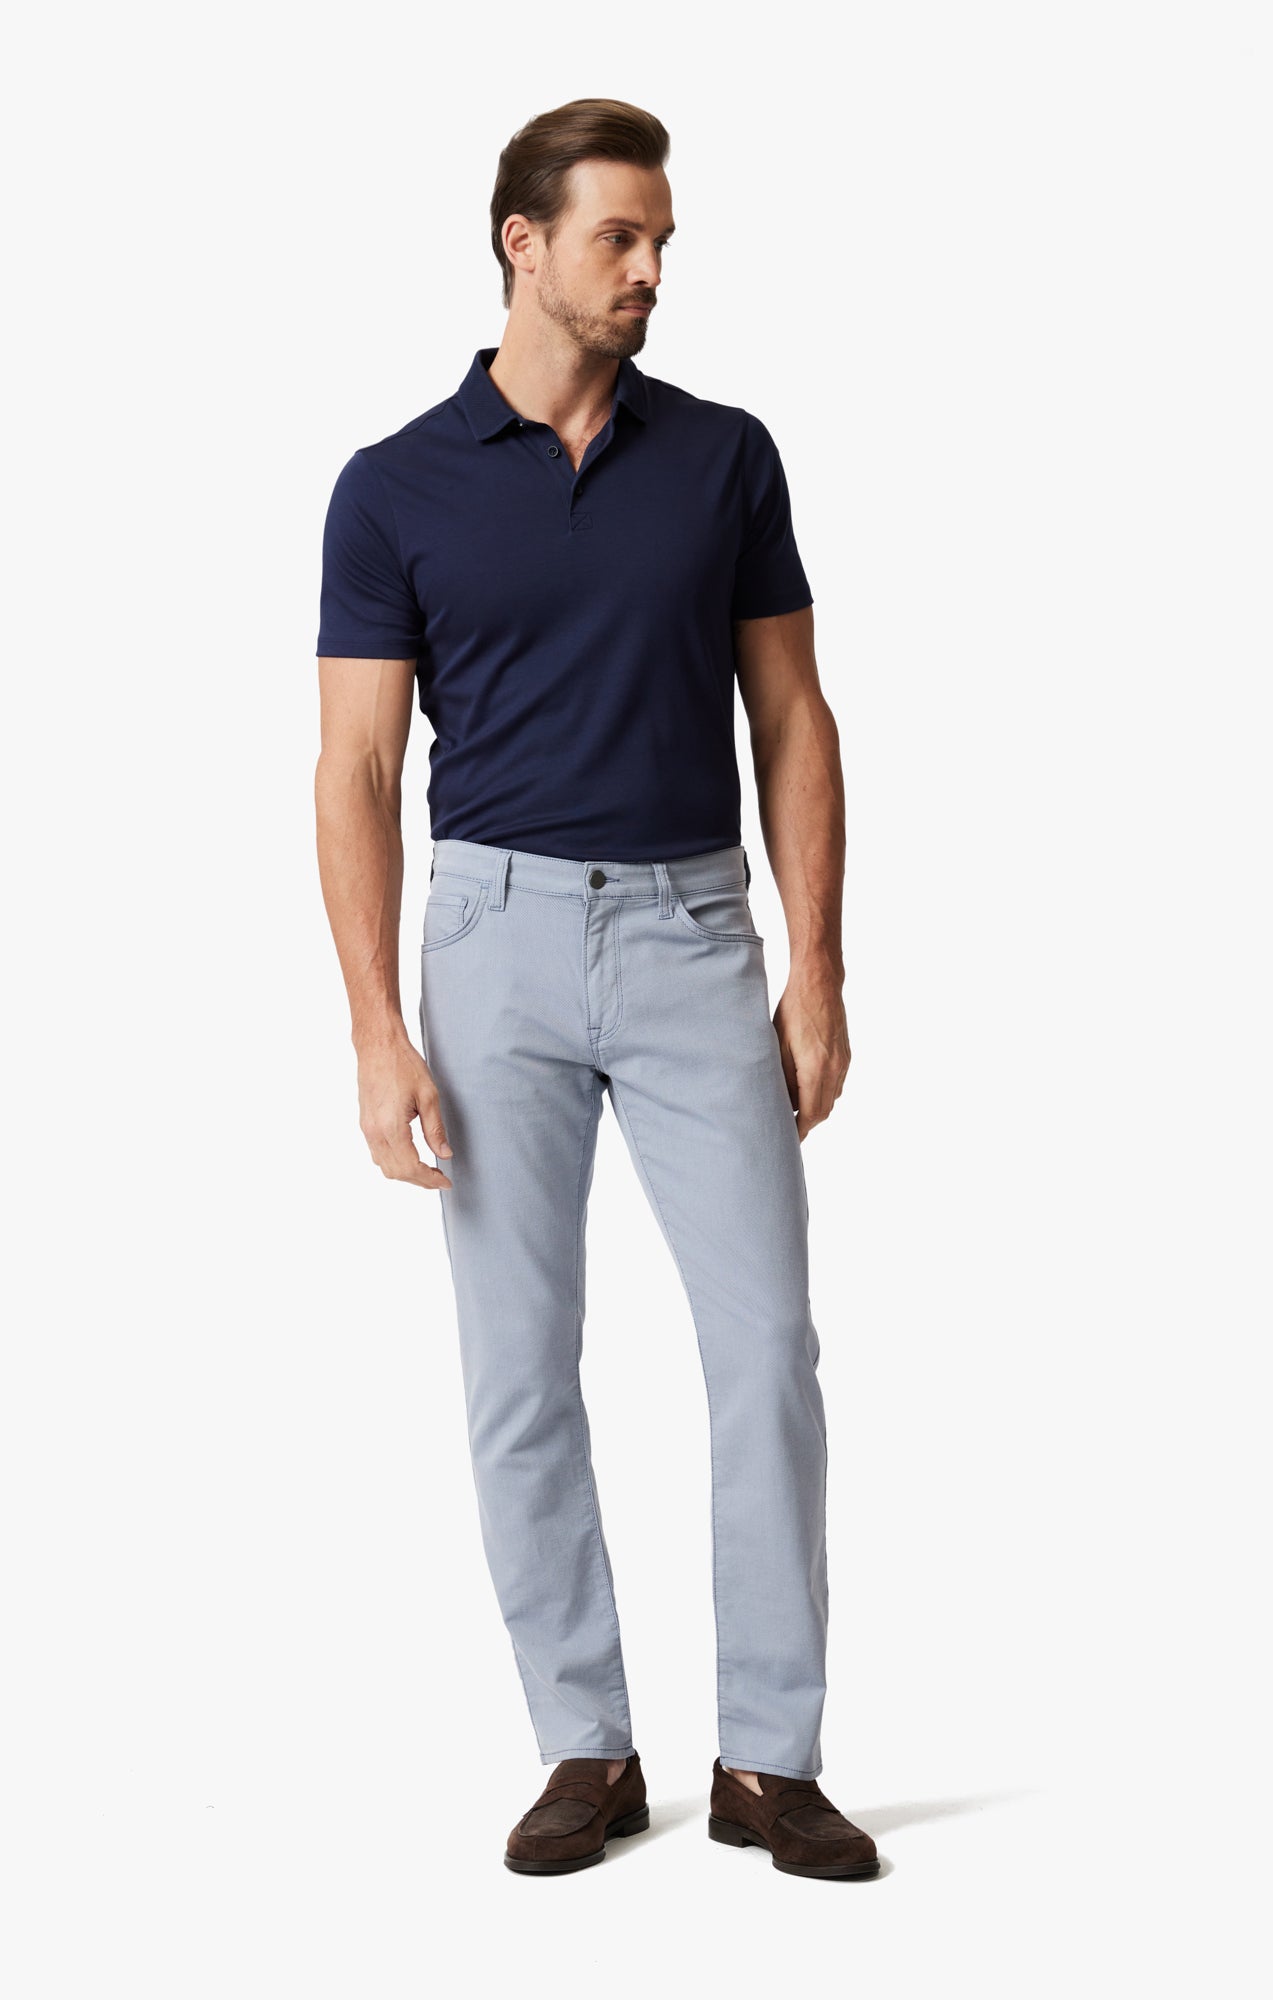 Courage Straight Leg Pants In Blue Refined Twill